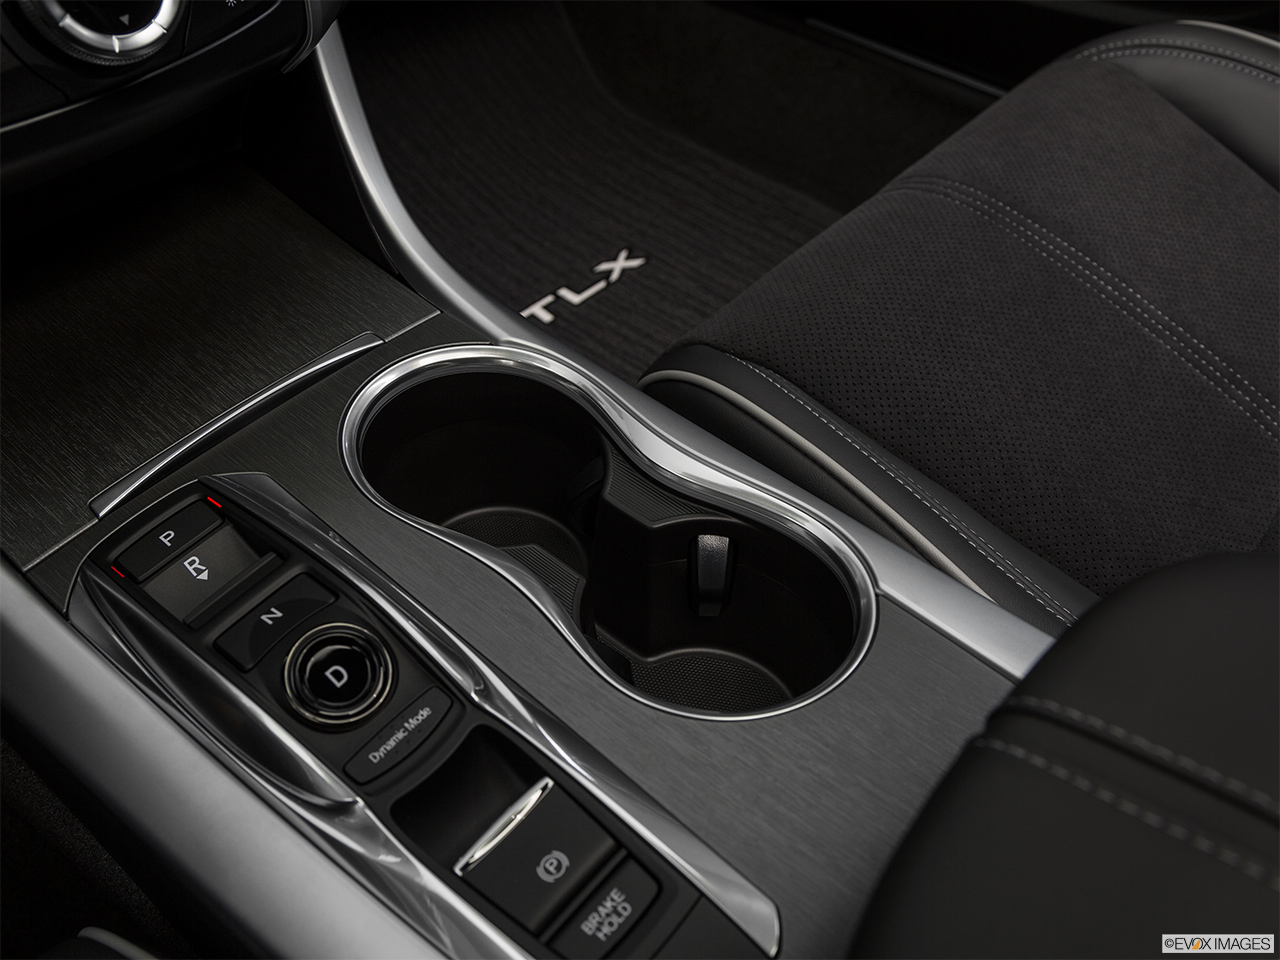 2020 Acura TLX 3.5L Cup holders. 